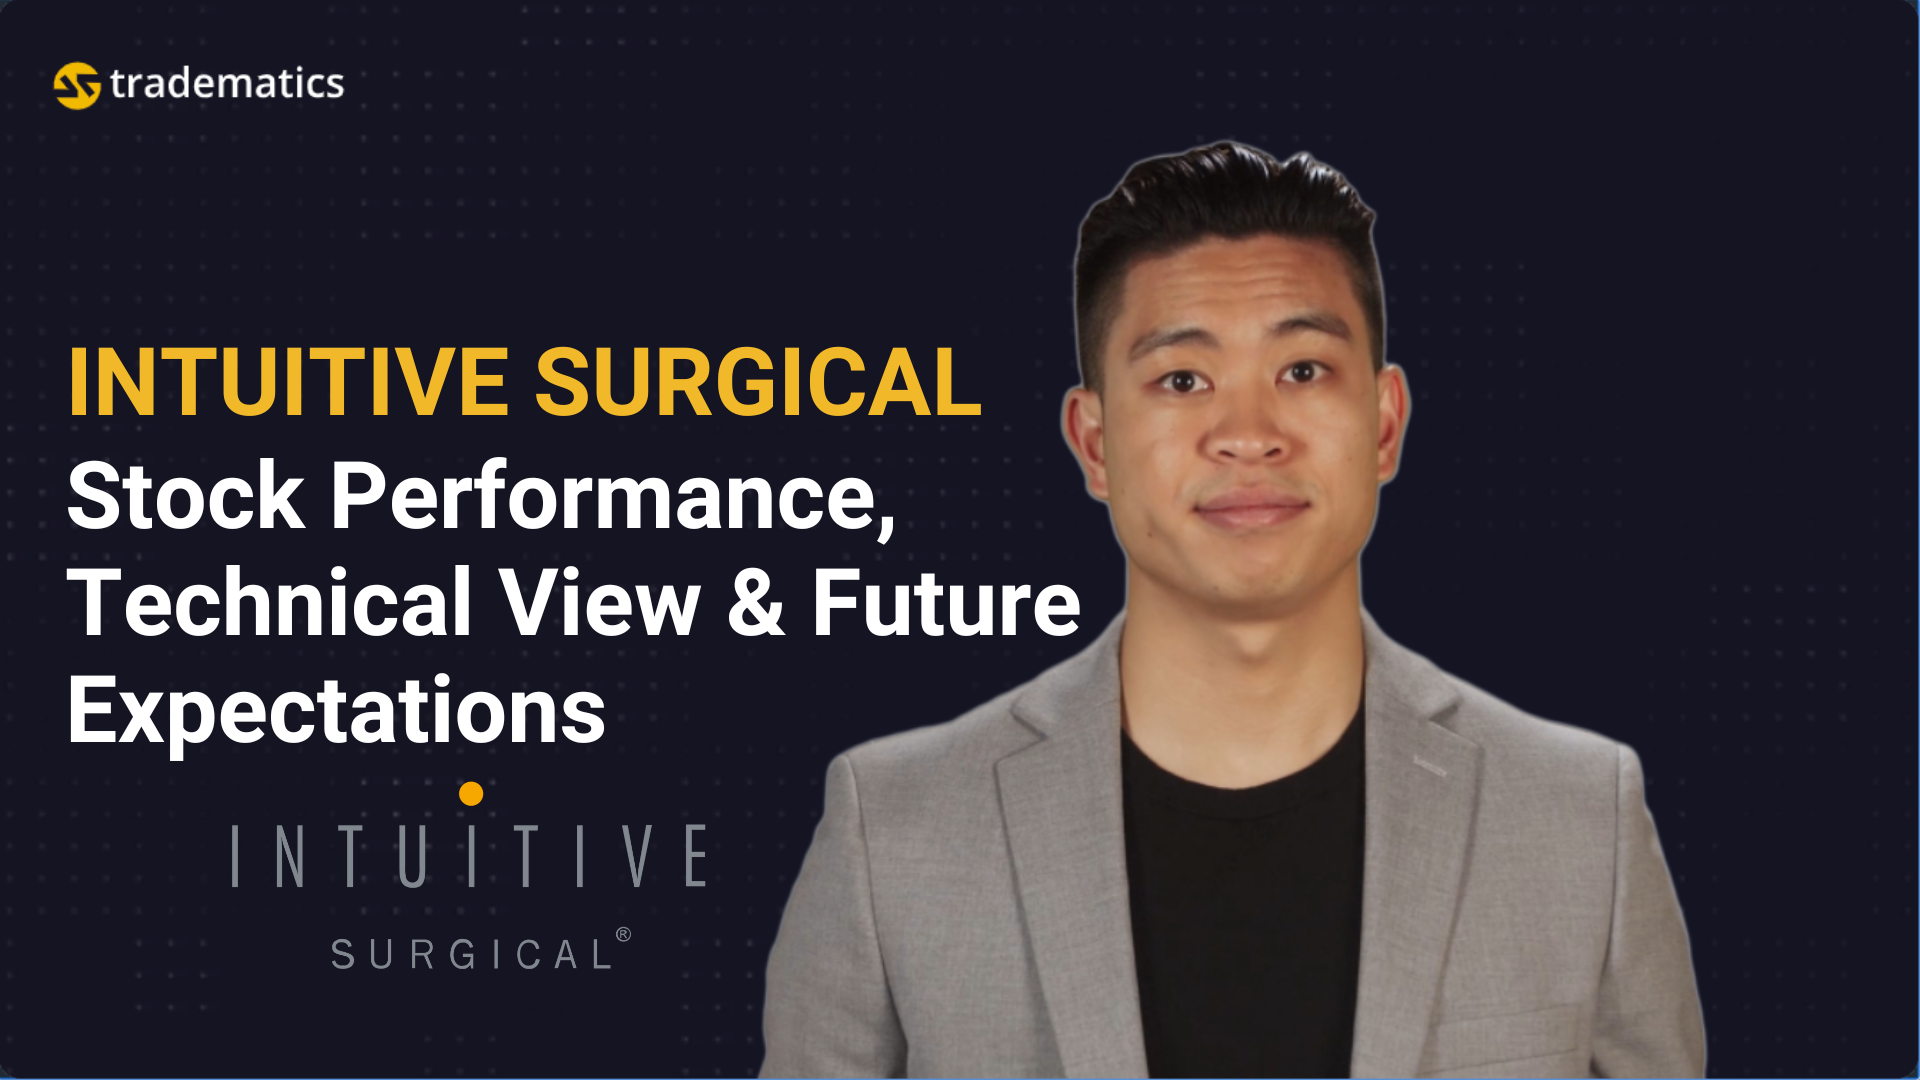 Tradematics | #25 Intuitive Surgical | Recent Performance & Stock Overview